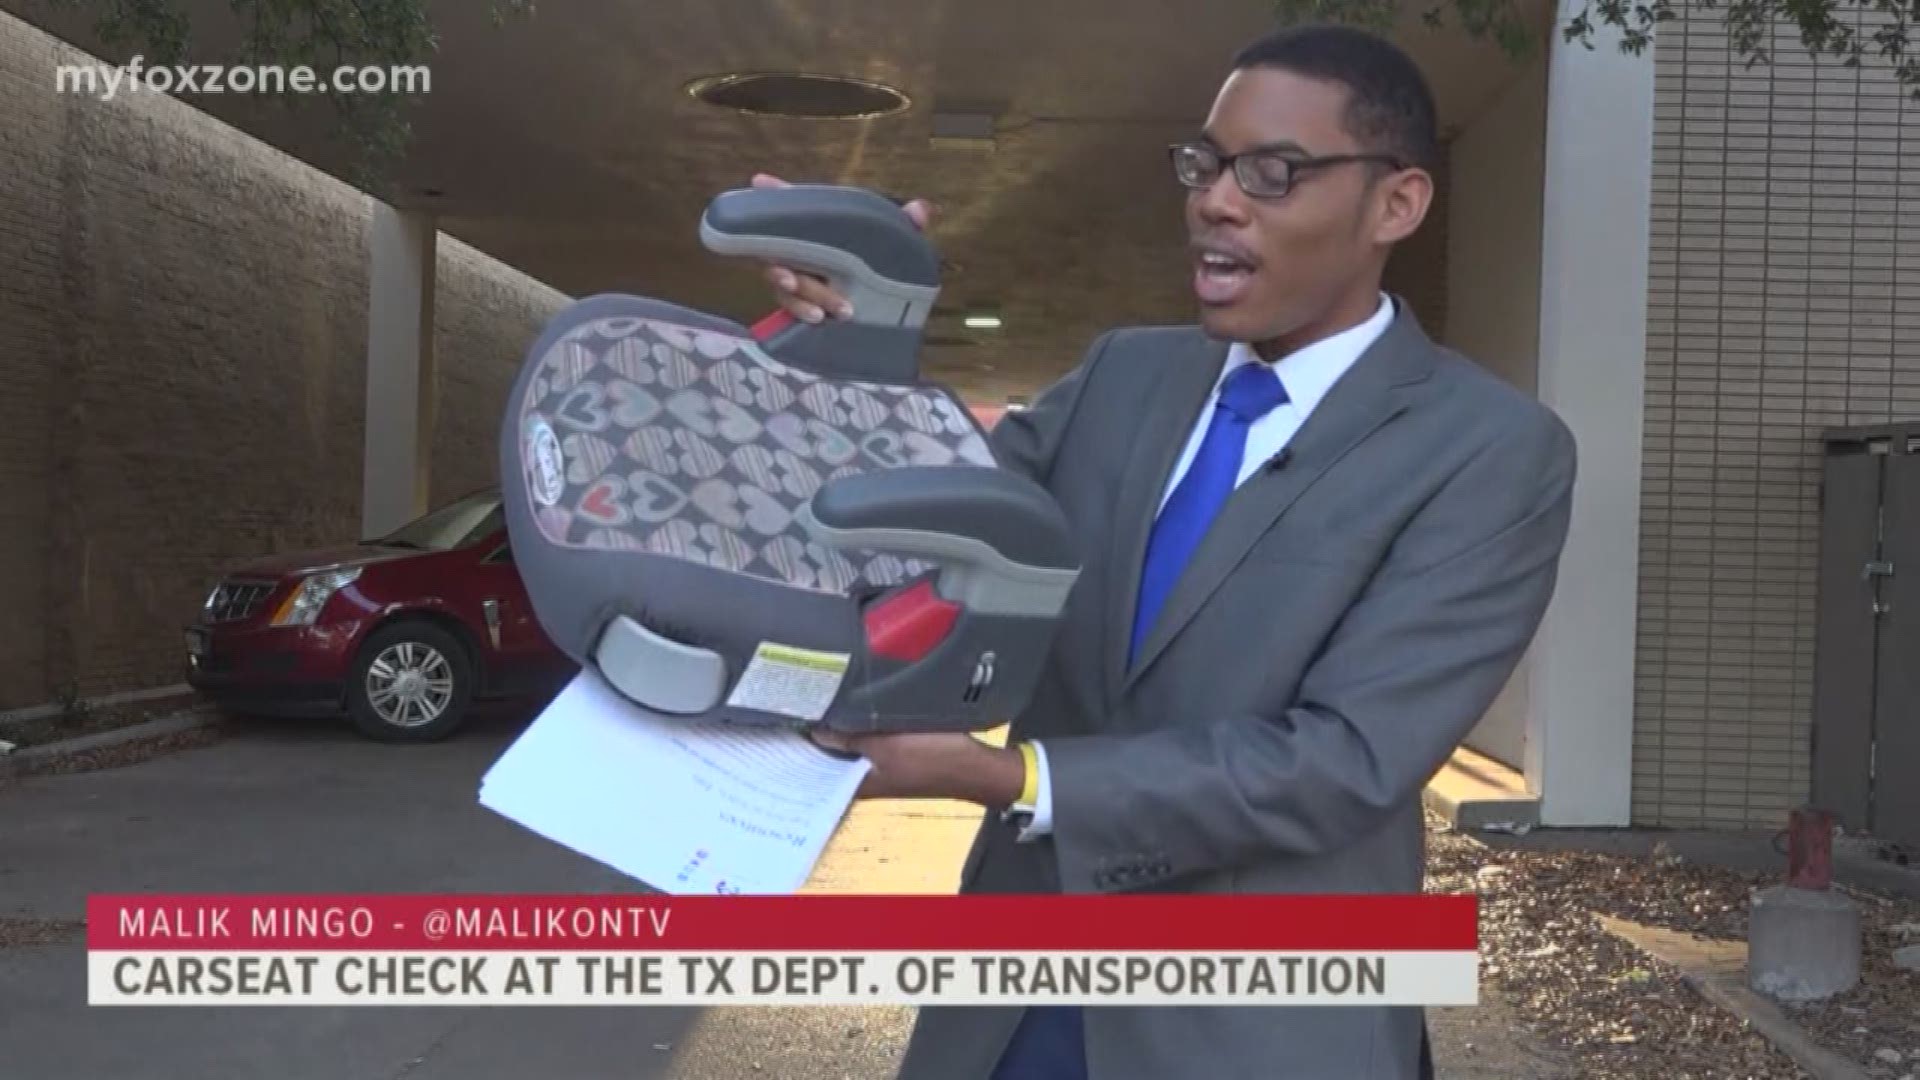 Our Malik Mingo shares some tips on how to make sure your child's car seat is safe for summer traveling.